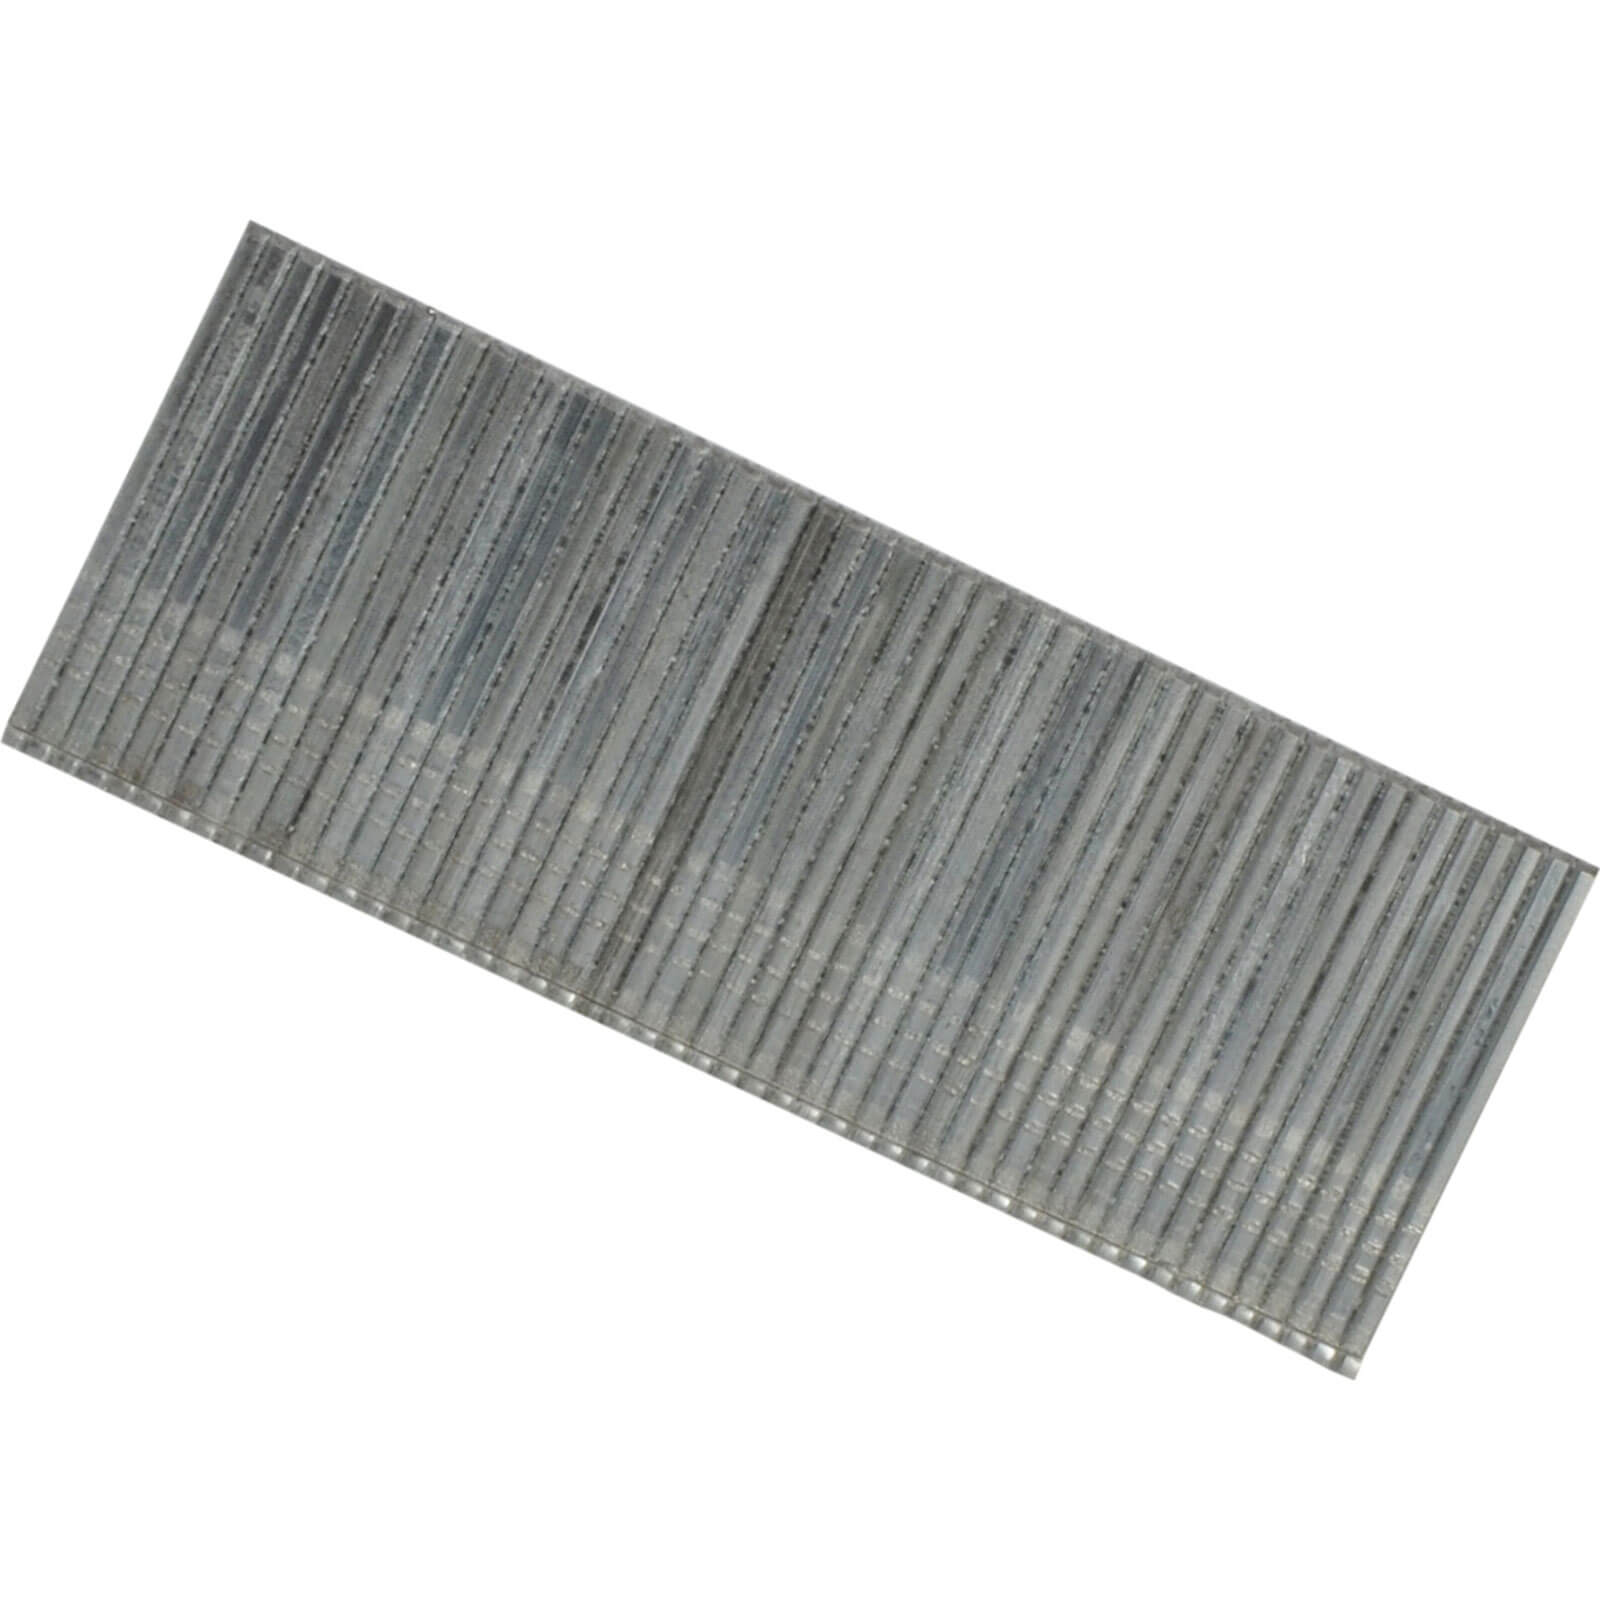 Image of Bostitch 16 Gauge Straight Finish Nails 32mm Pack of 2500